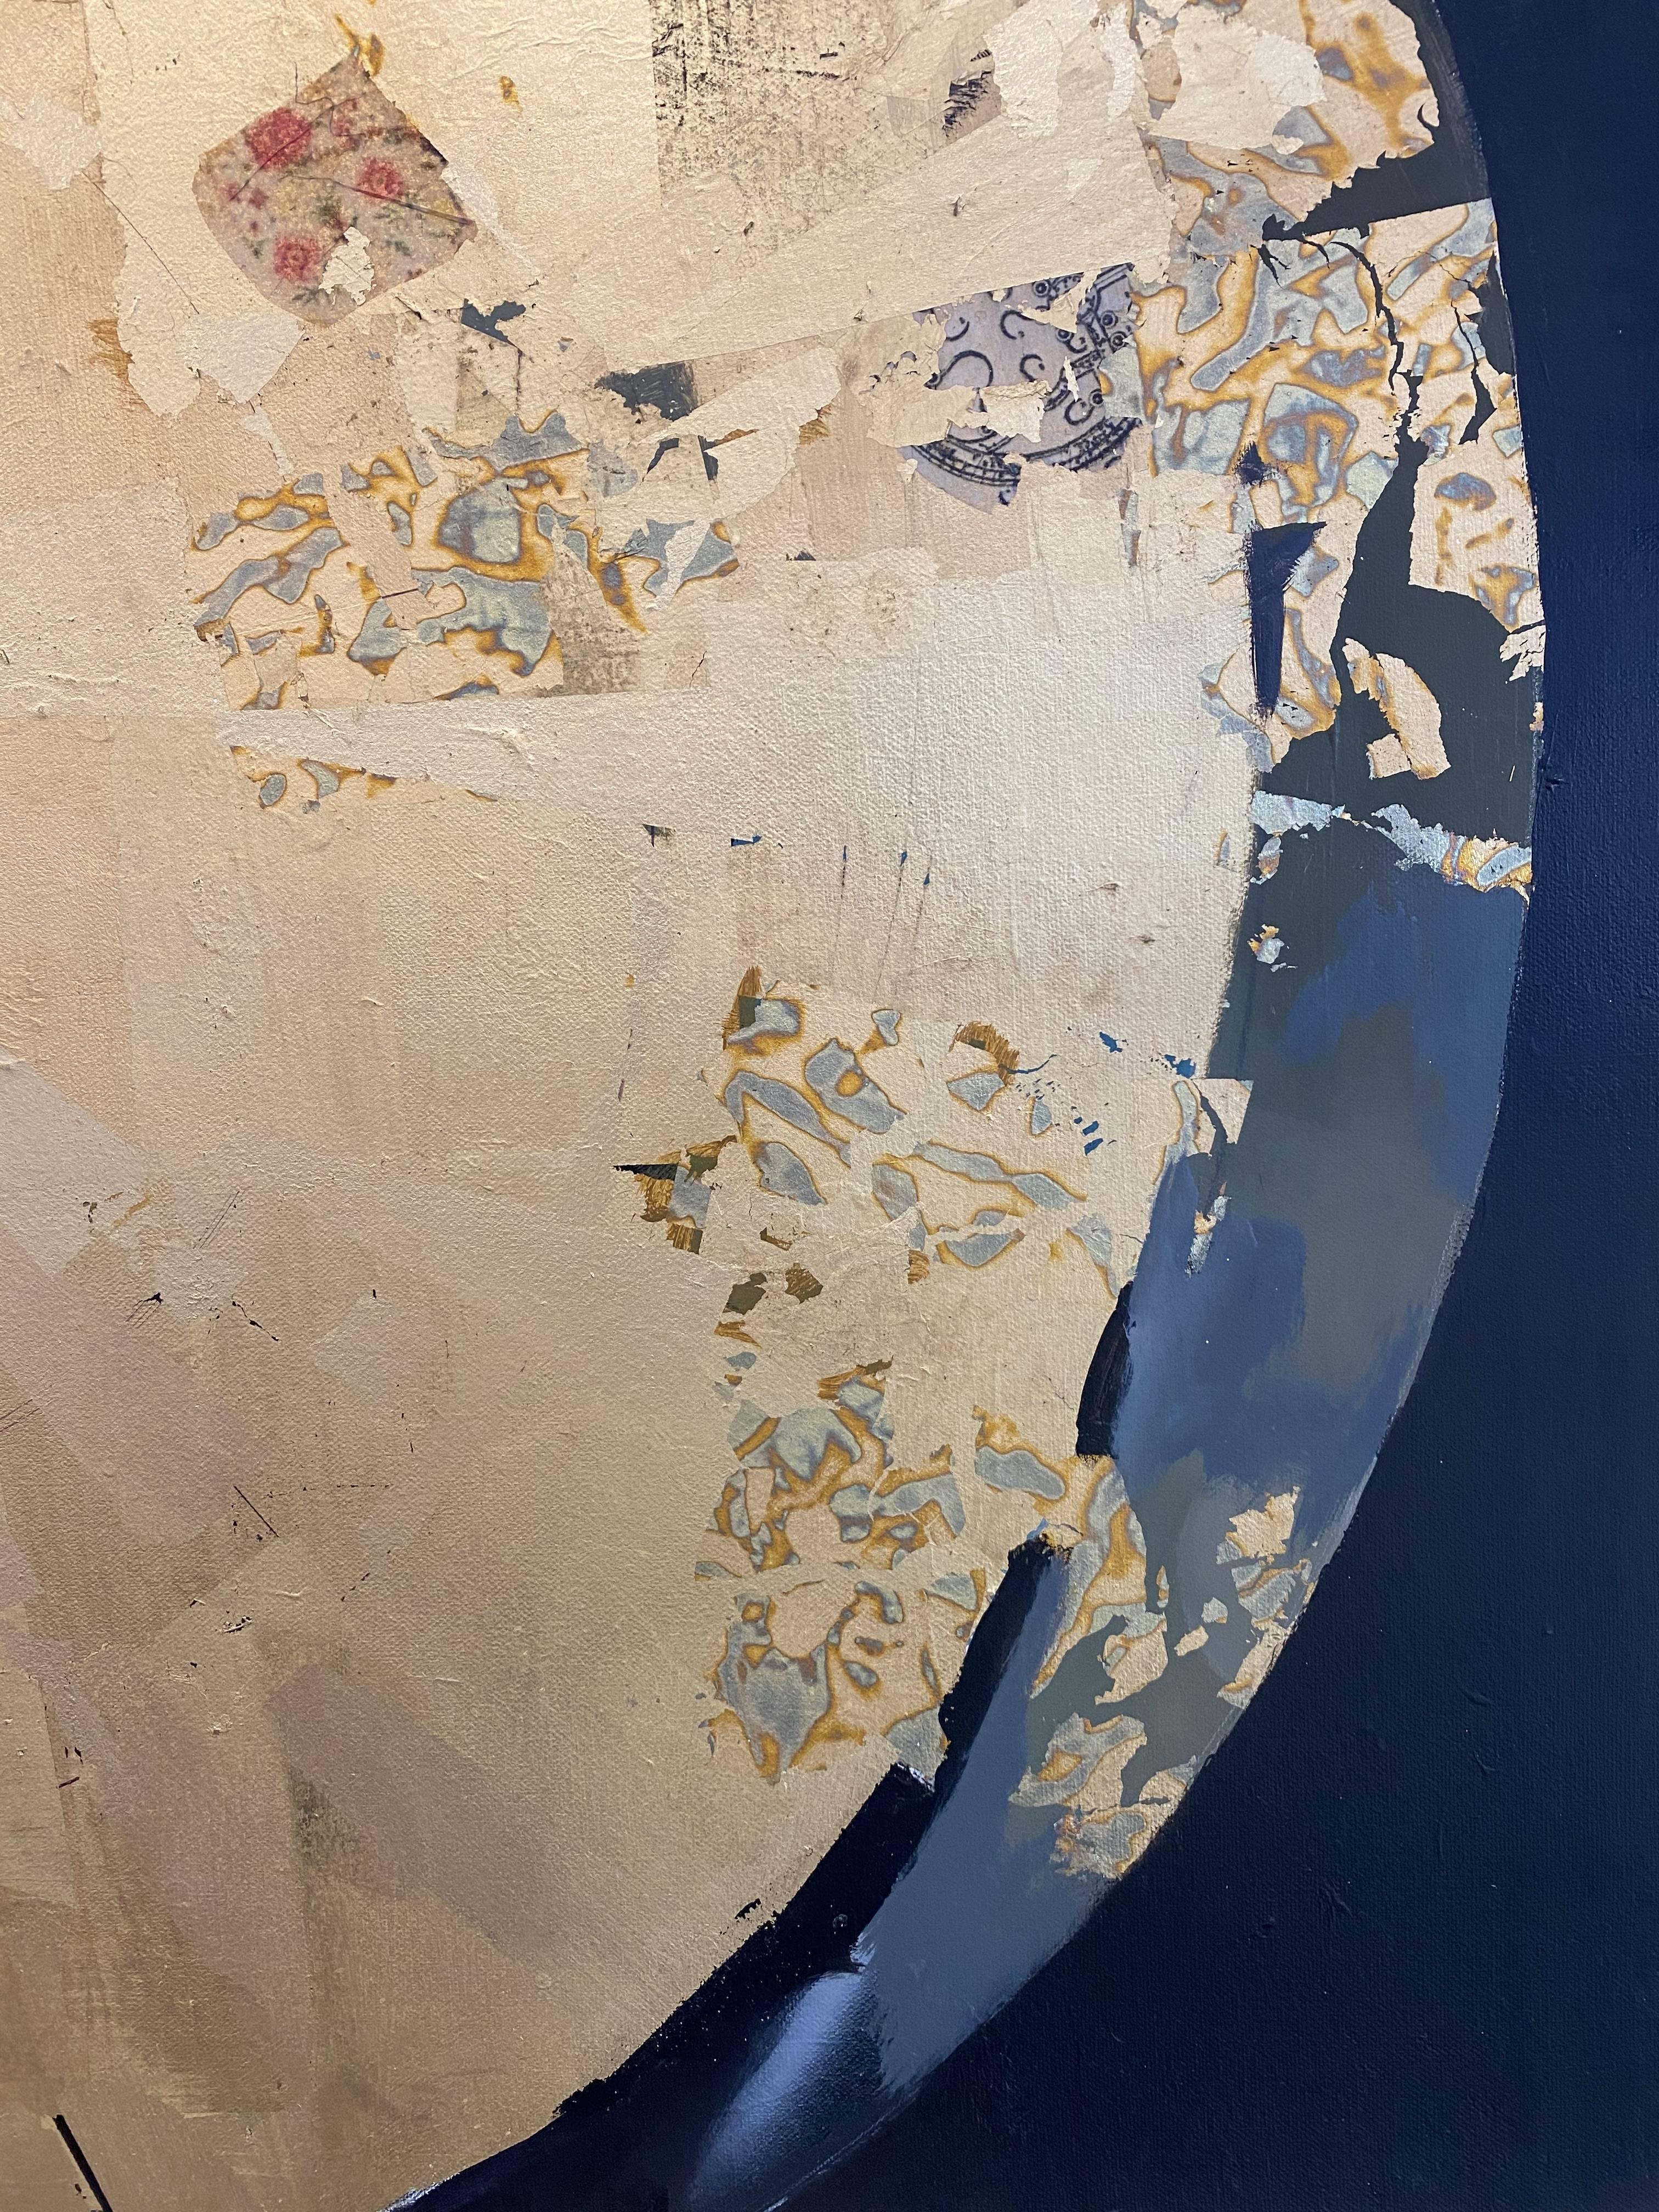 gold leaf on your acrylic paintings